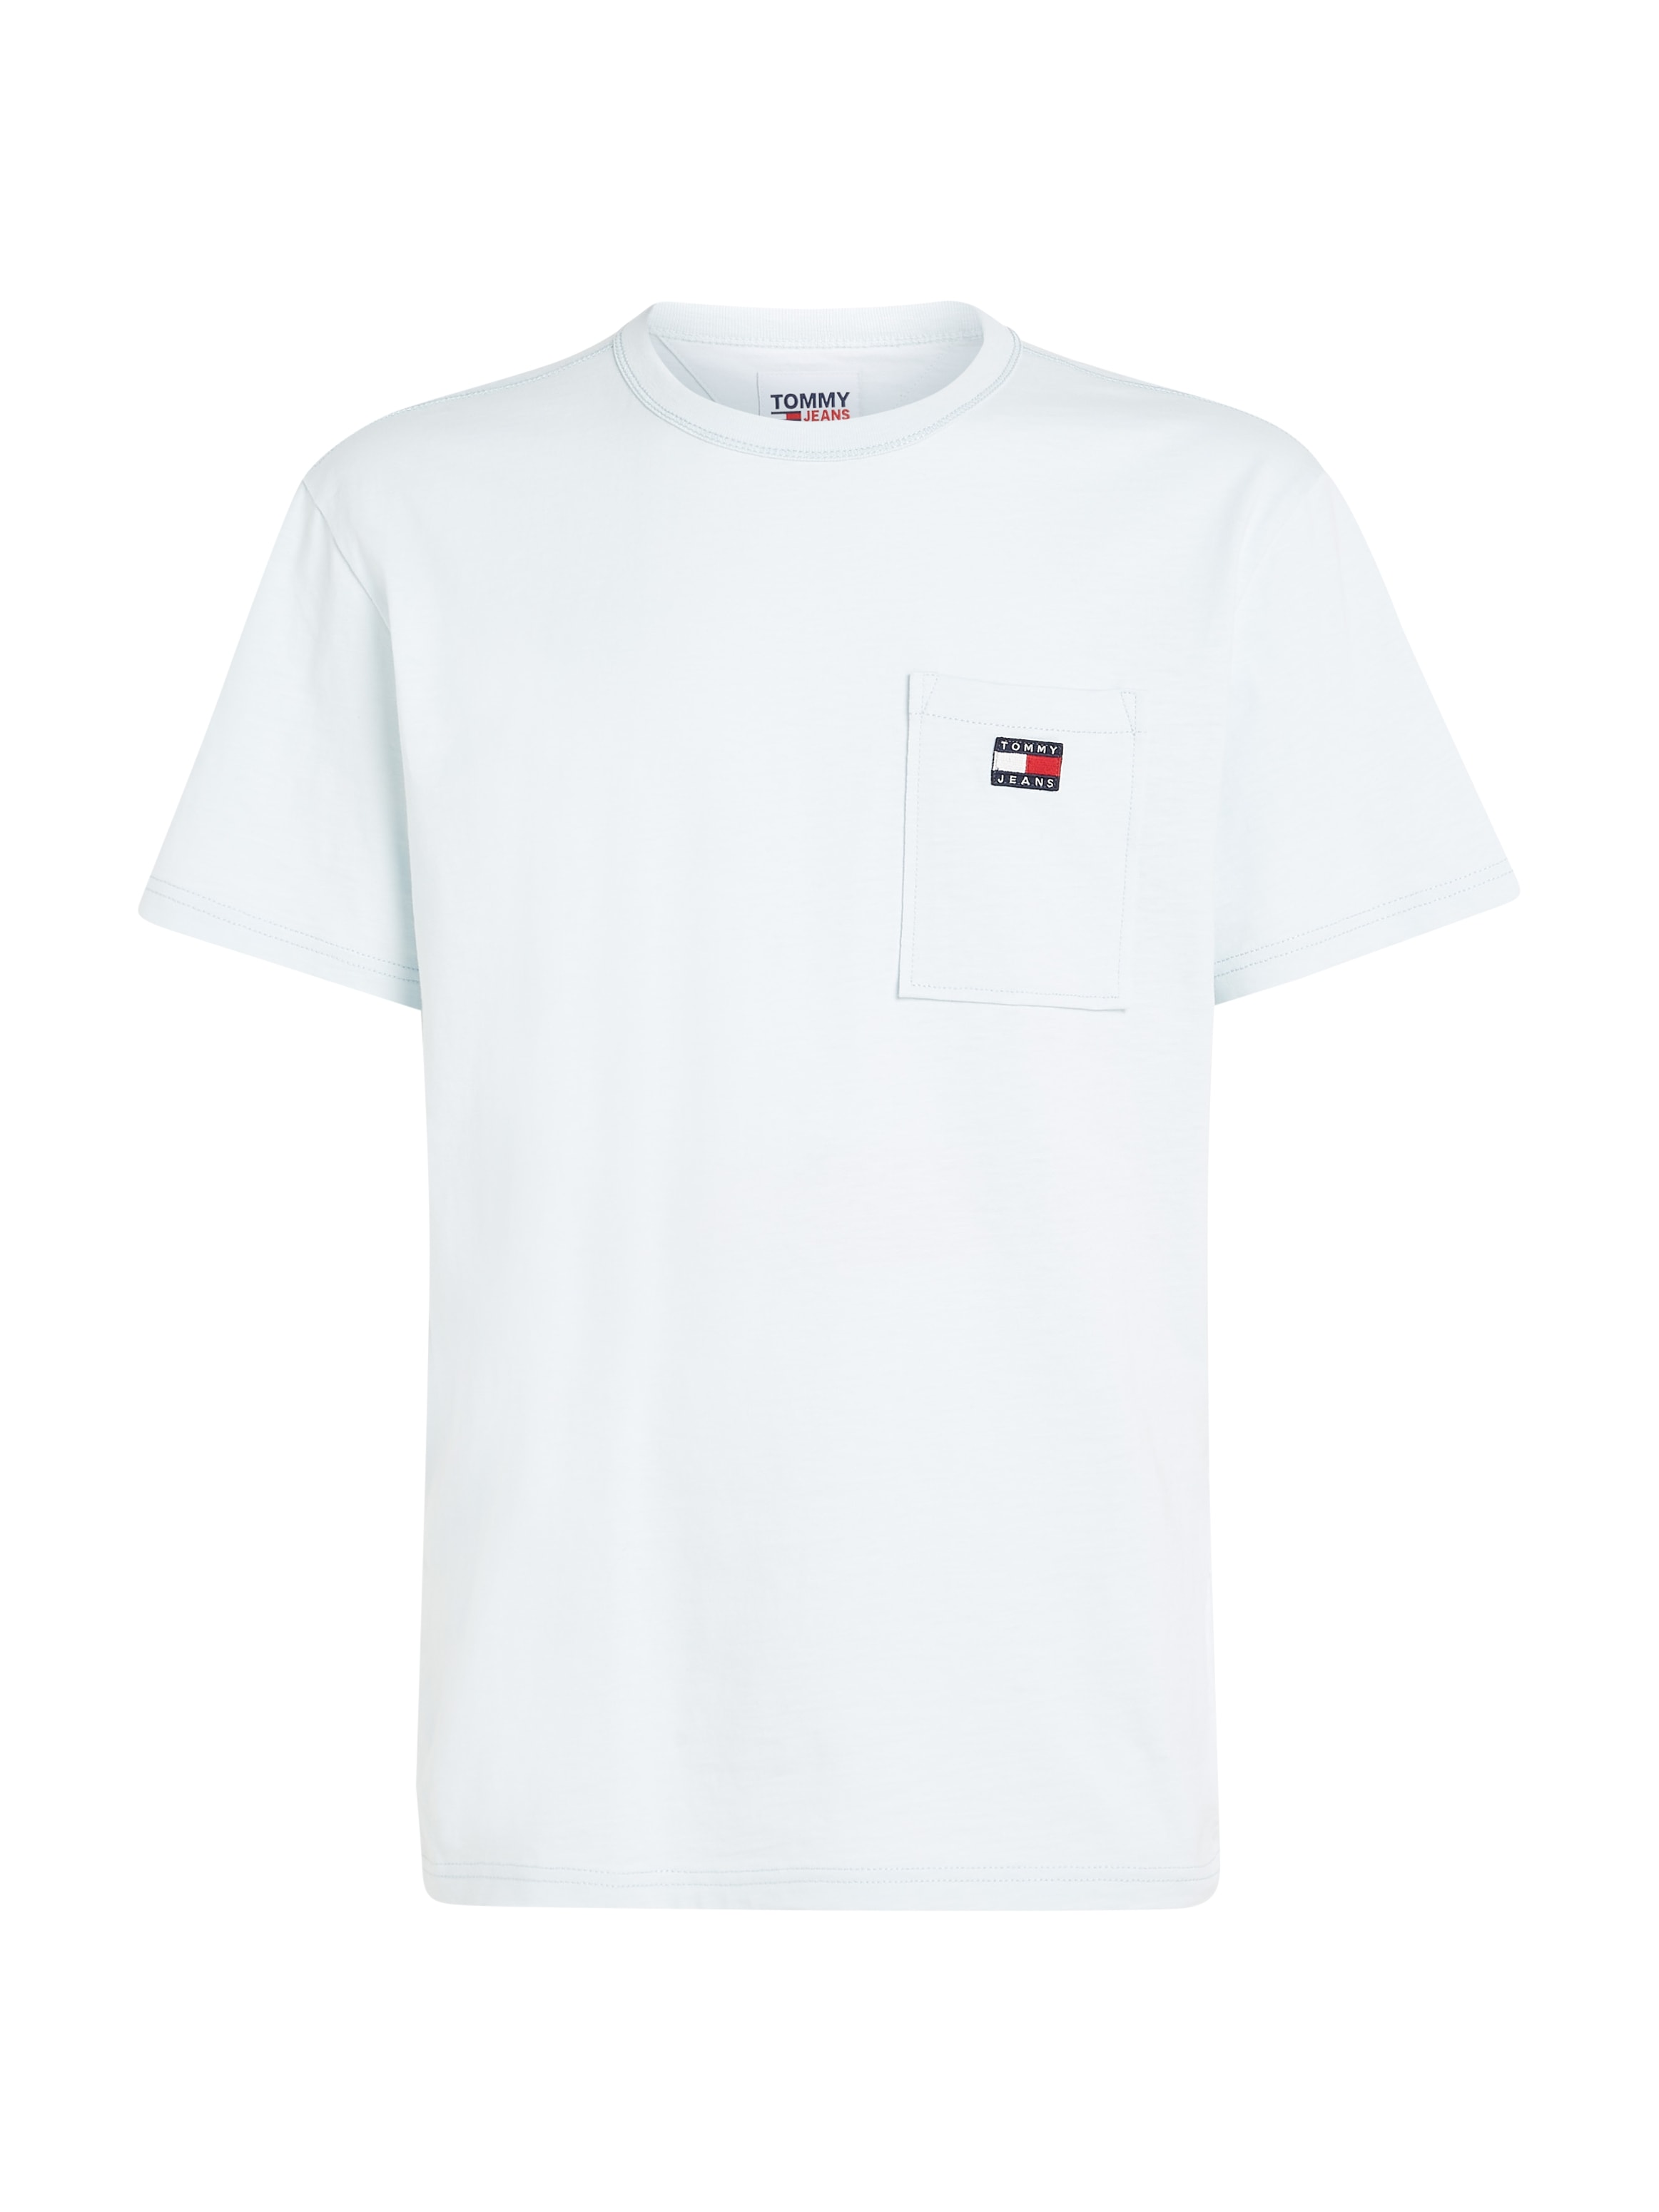 Tommy Jeans T-Shirt ♕ bei BADGE »TJM TEE« CLSC POCKET